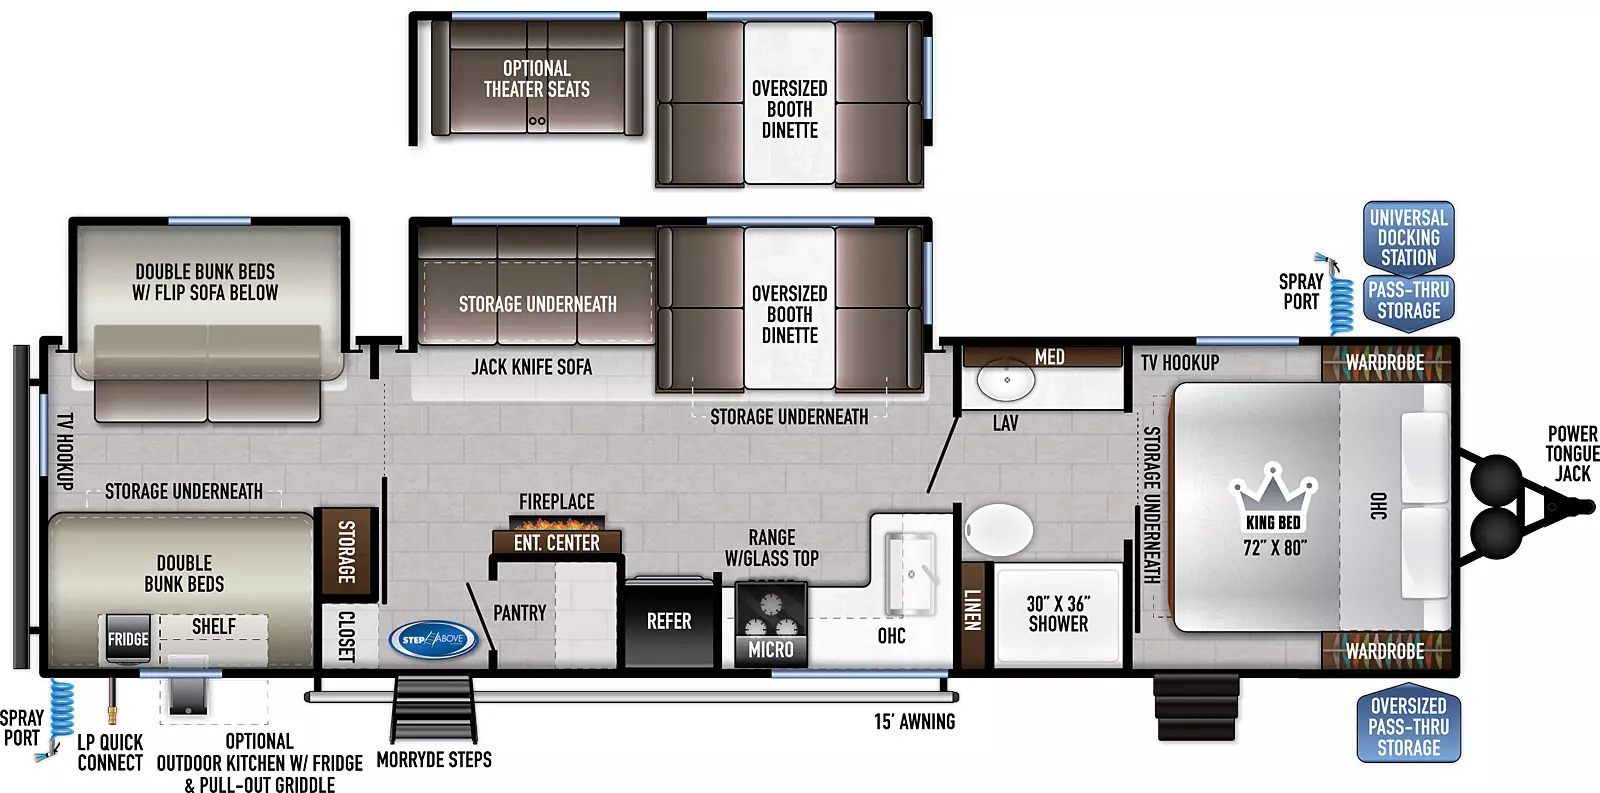 The 312BH has two slides on the off-door side – one in the rear bunk area of the coach and one in the kitchen living dining area. This floorplan features two entry doors on the door side – one near the rear leading into the main kitchen living dining area, another in the front bedroom. Interior layout from front to back: front bedroom with king bed featuring overhead cabinets, bedside wards, TV hookup, underbed storage and solid sliding privacy door; pass through bathroom to kitchen living dining area; bathroom has sink and counter space with overhead cabinets on off-door side and a porcelain toilet, linen cabinets and shower on the door side; L-shaped kitchen counter with overhead cabinets above residential sink, 3-burner cooktop with oven and overhead microwave, refrigerator; entertainment center with fireplace; across in the off-door side slide is the oversized booth dinette and jackknife sofa - both with storage underneath; upon entering at door side to the right is a pantry and to the left is a closet; solid sliding privacy door to bunkhouse; off-door side slide has double bunk beds with flip sofa below, across on door side has storage cabinets and double bunk bends with storage underneath. Exterior from front to back: Power tongue jack, oversized pass-thru storage on door side, universal docking station in pass-thru on off-door side with spray port; fold-up steps at bedroom entrance on door side, solid steps at main entry, optional outside kitchen and 15' awning.